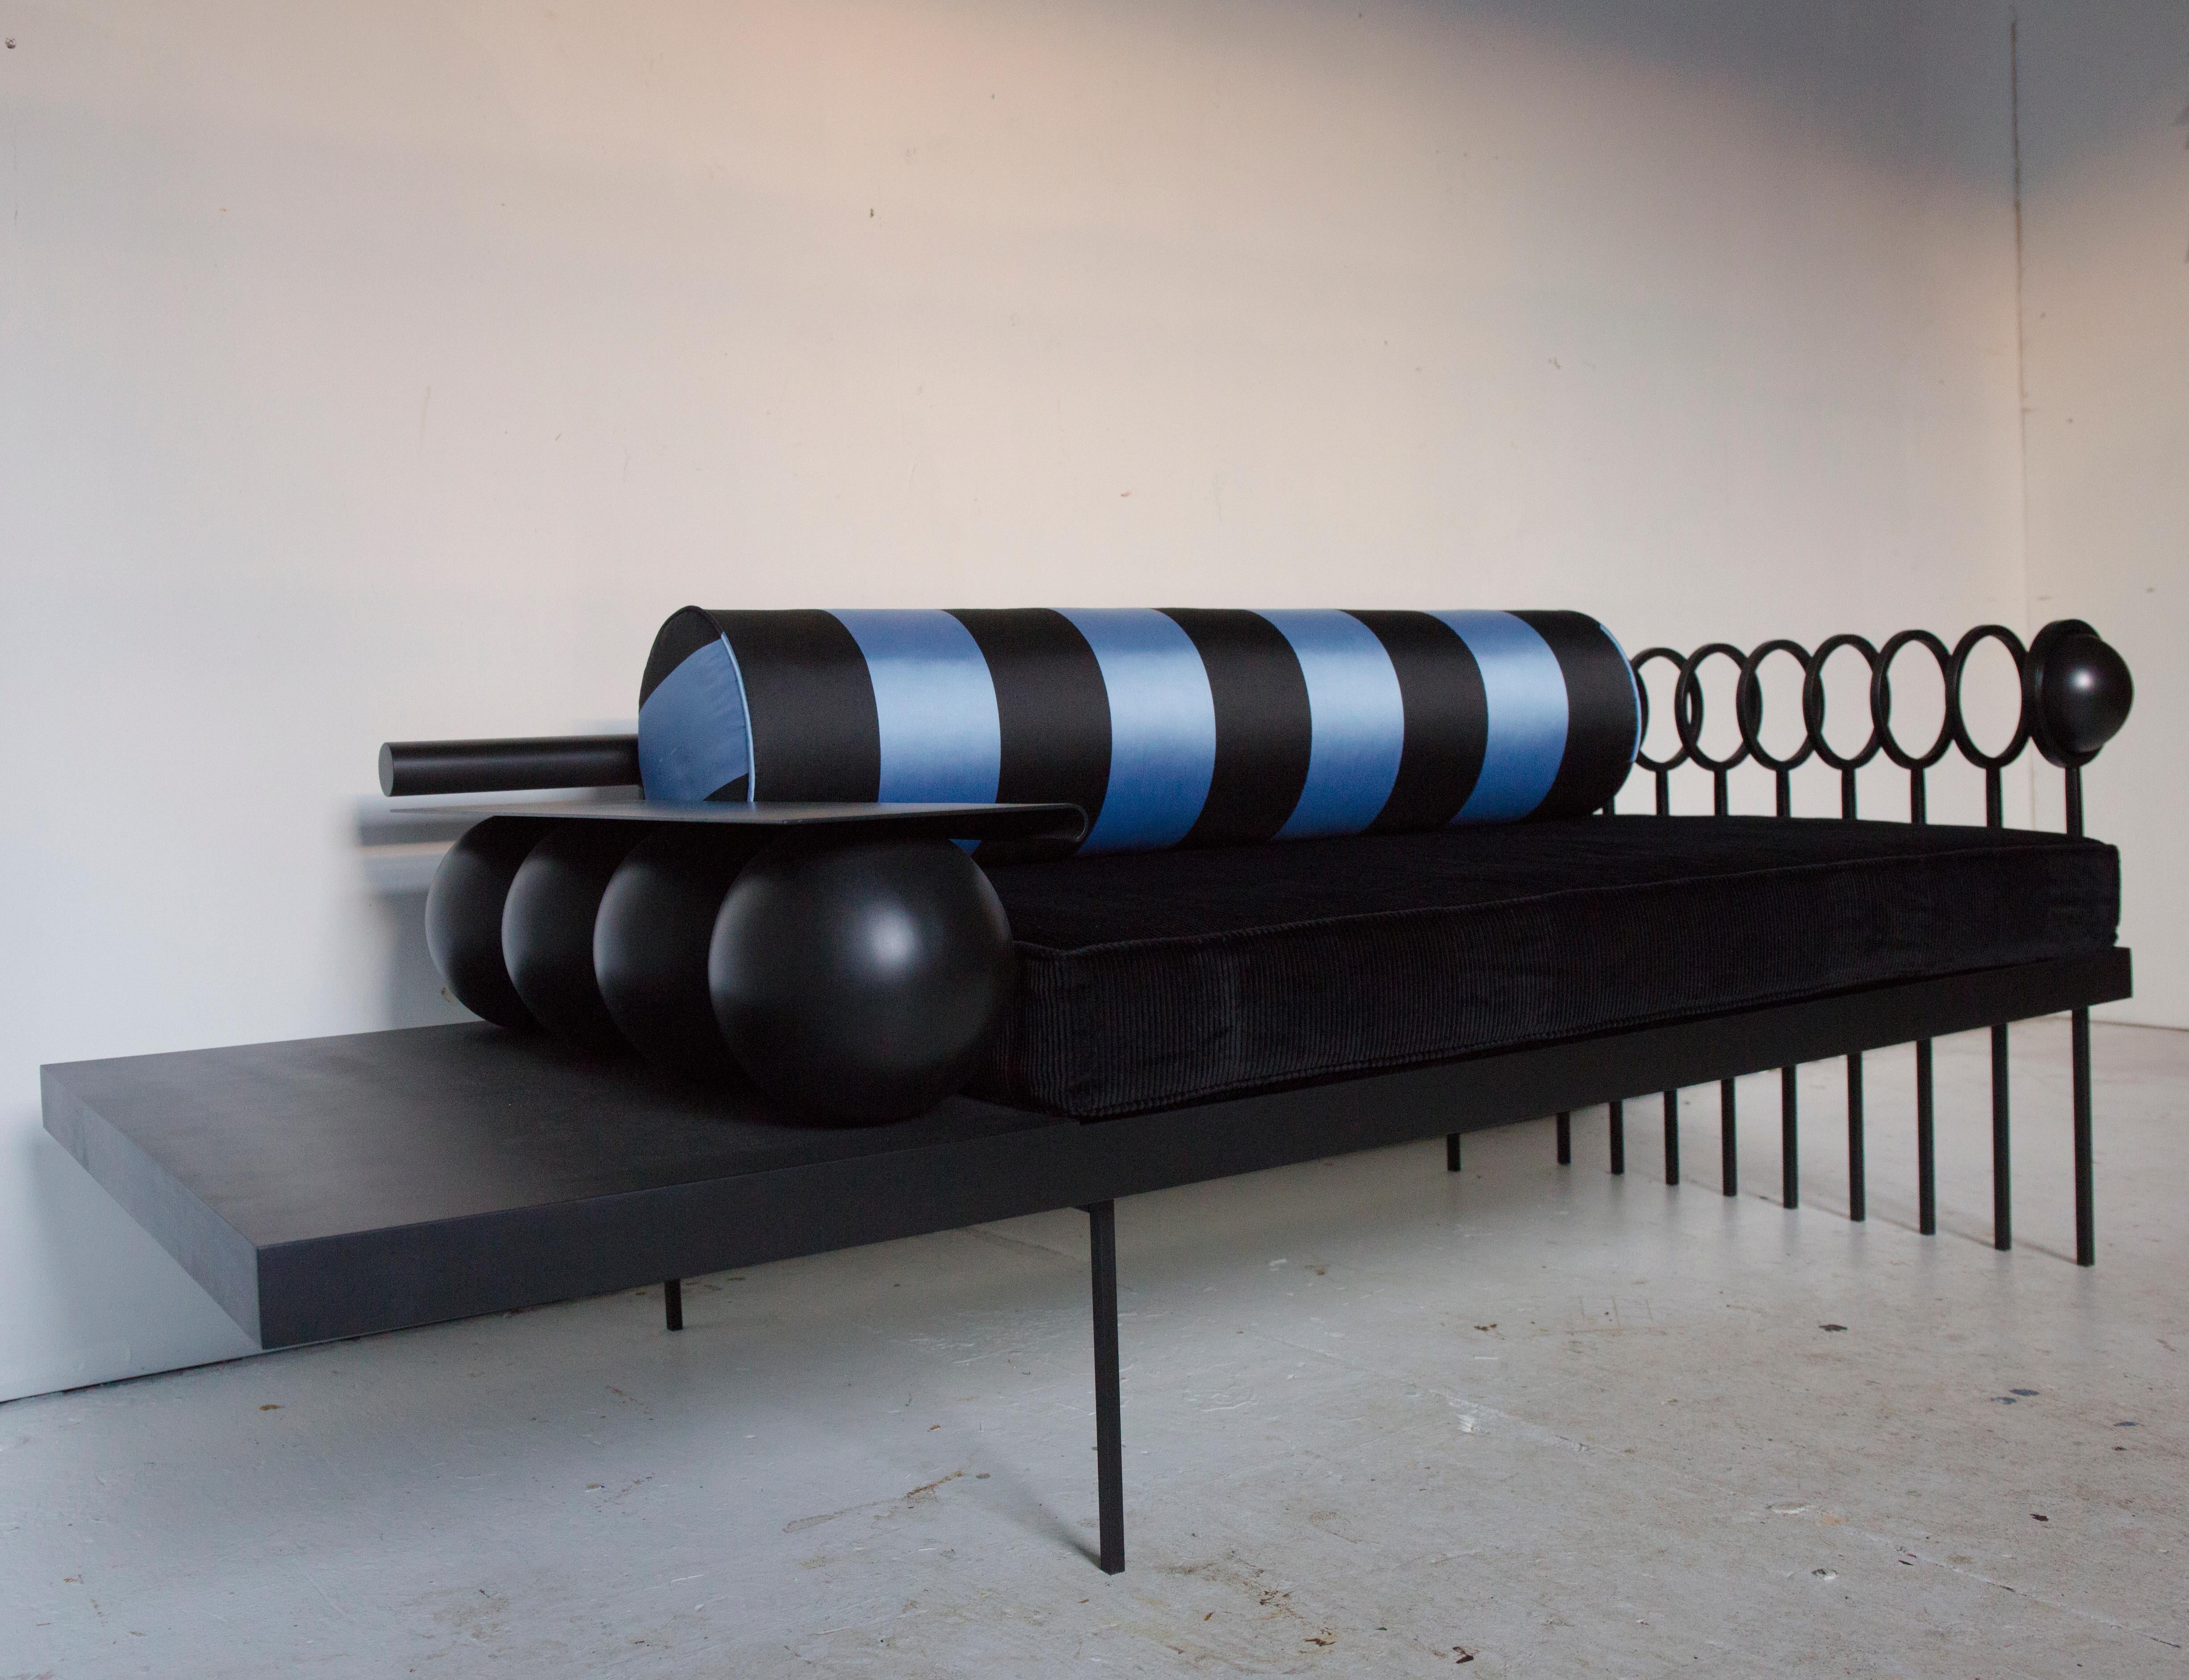 The Orbital Plane Loveseat in matte black lacquered steel is paired with a lush wide wale corduroy cushion and lustrous striped bolster.  The steelwork is evocative of the atomic era, and unifies contemporary design with a playful geometry. 